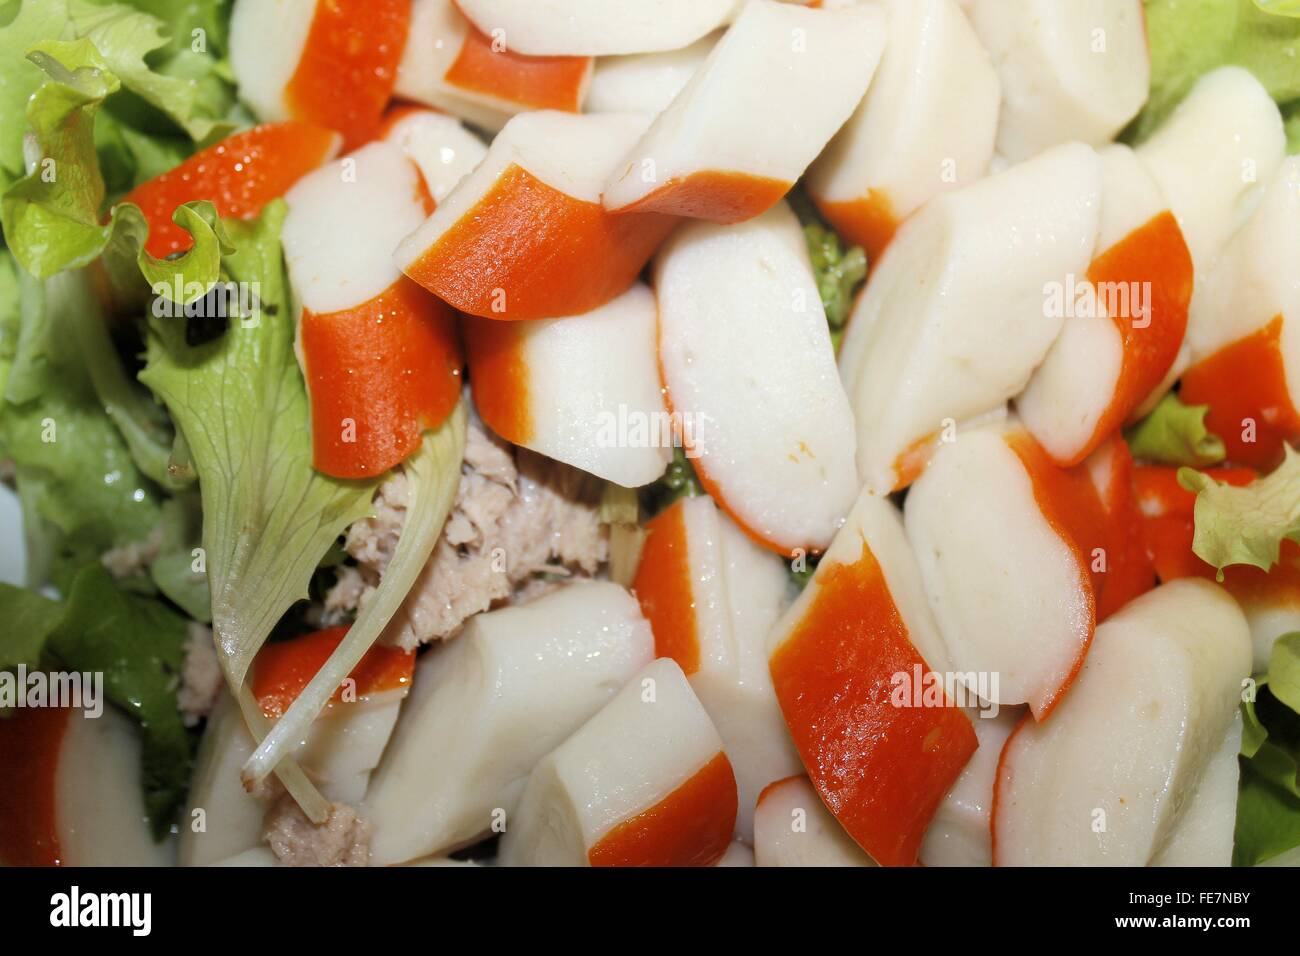 Salad with pieces of red crab stick and fresh lettuce Stock Photo